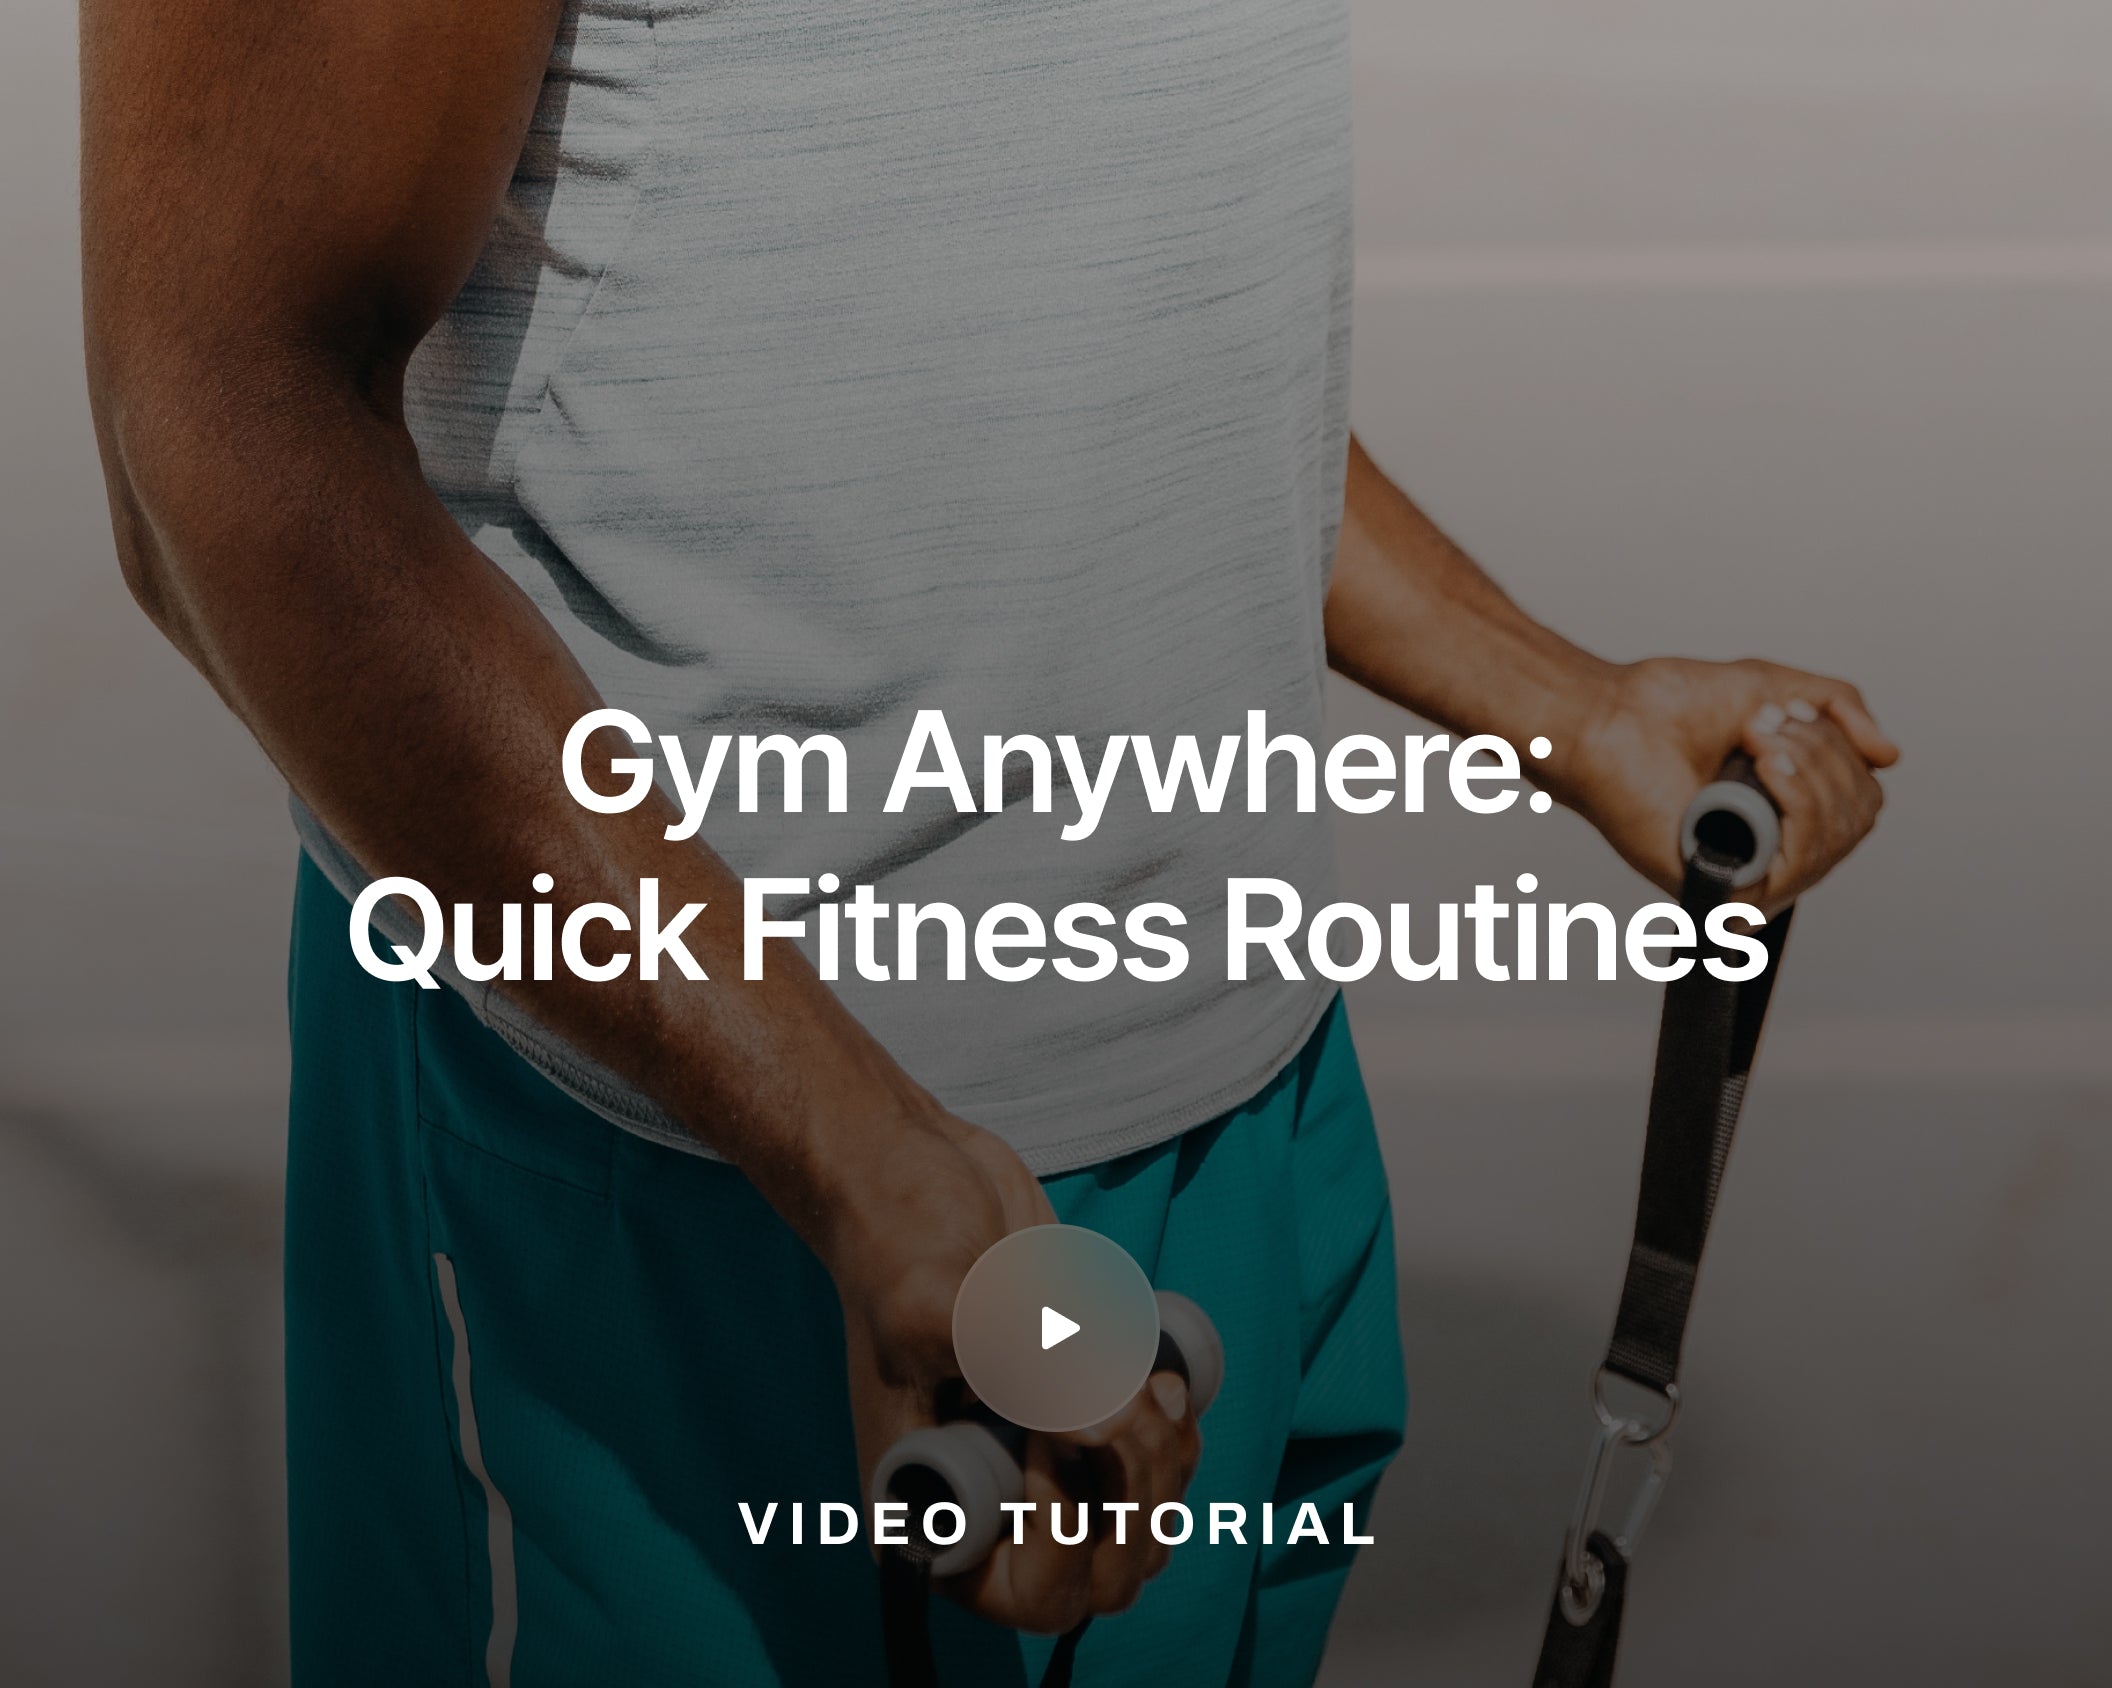 Gym Anywhere: Quick Fitness Routines